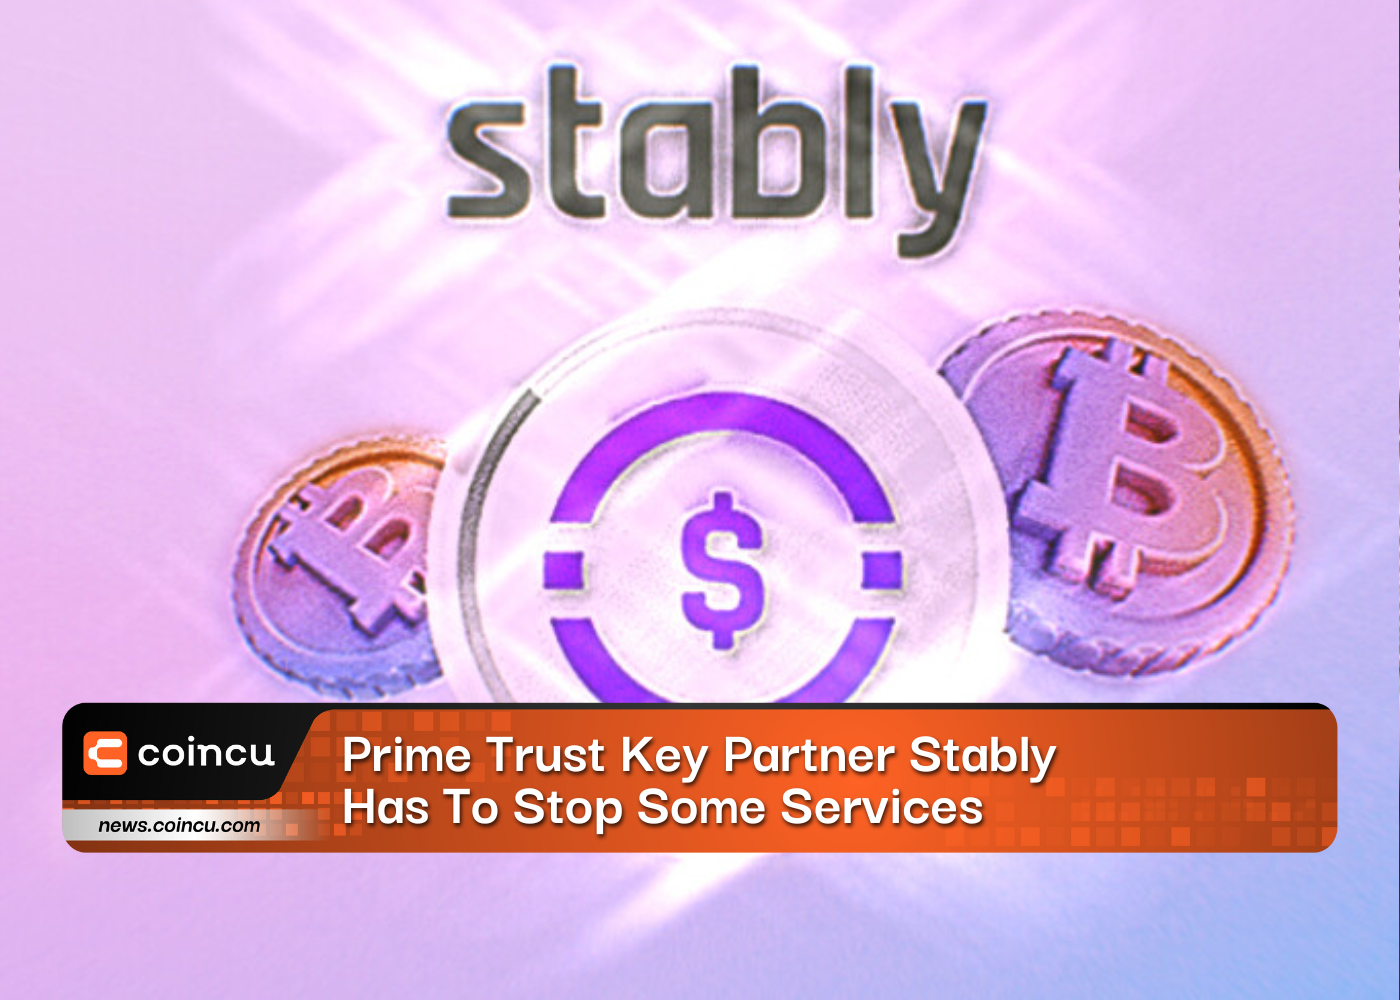 Prime Trust Key Partner Stably Has To Stop Some Services